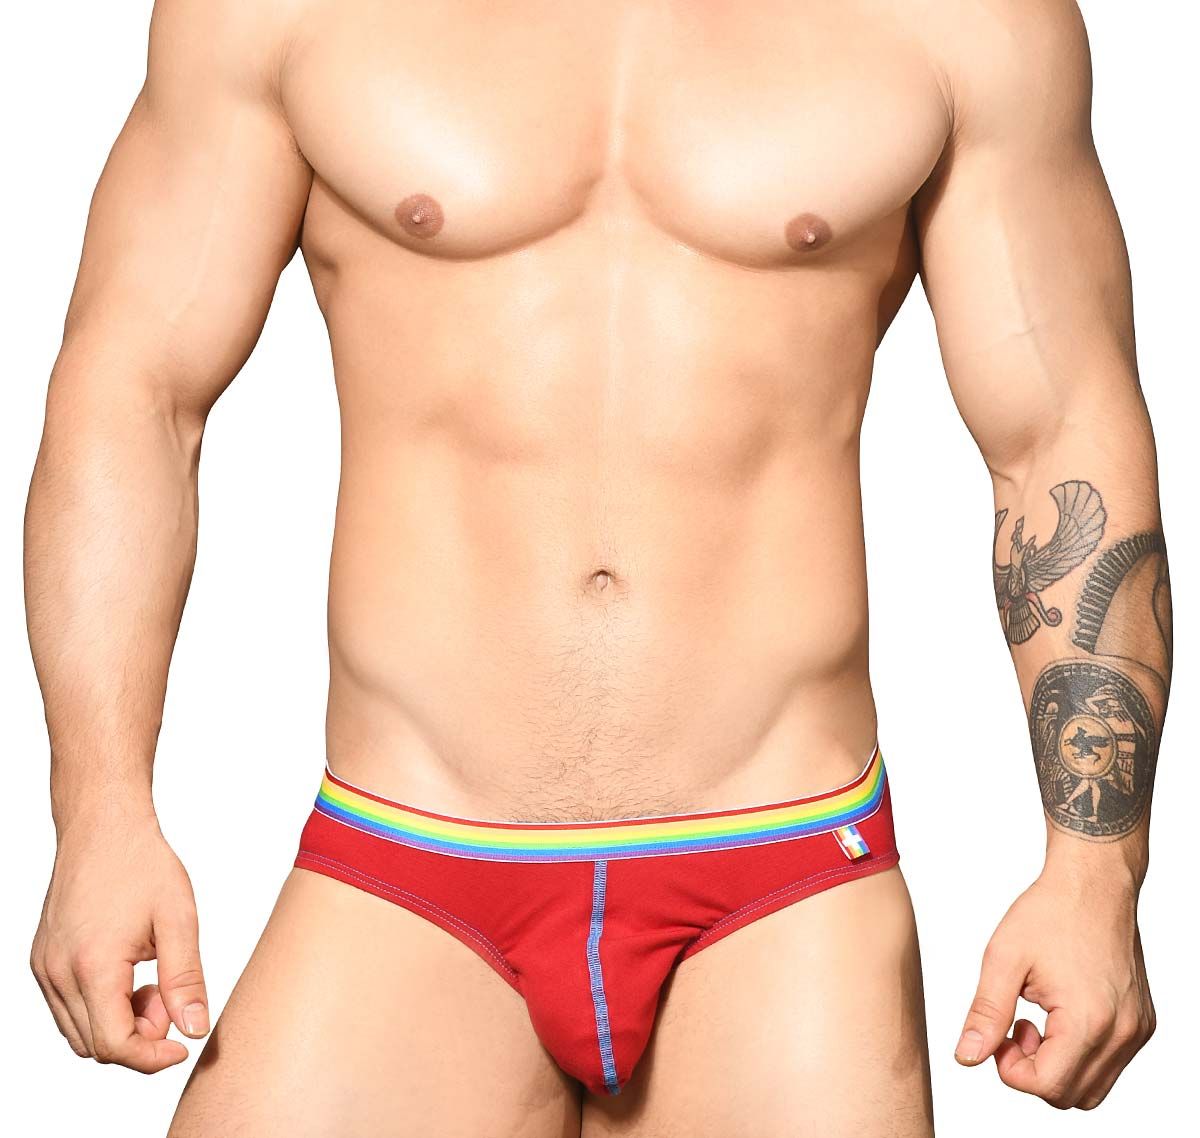 Andrew Christian 3 Paquet Slips BOY BRIEF UNICORN 3-PACK w/Almost Naked 91702, rouge/bleu/noir